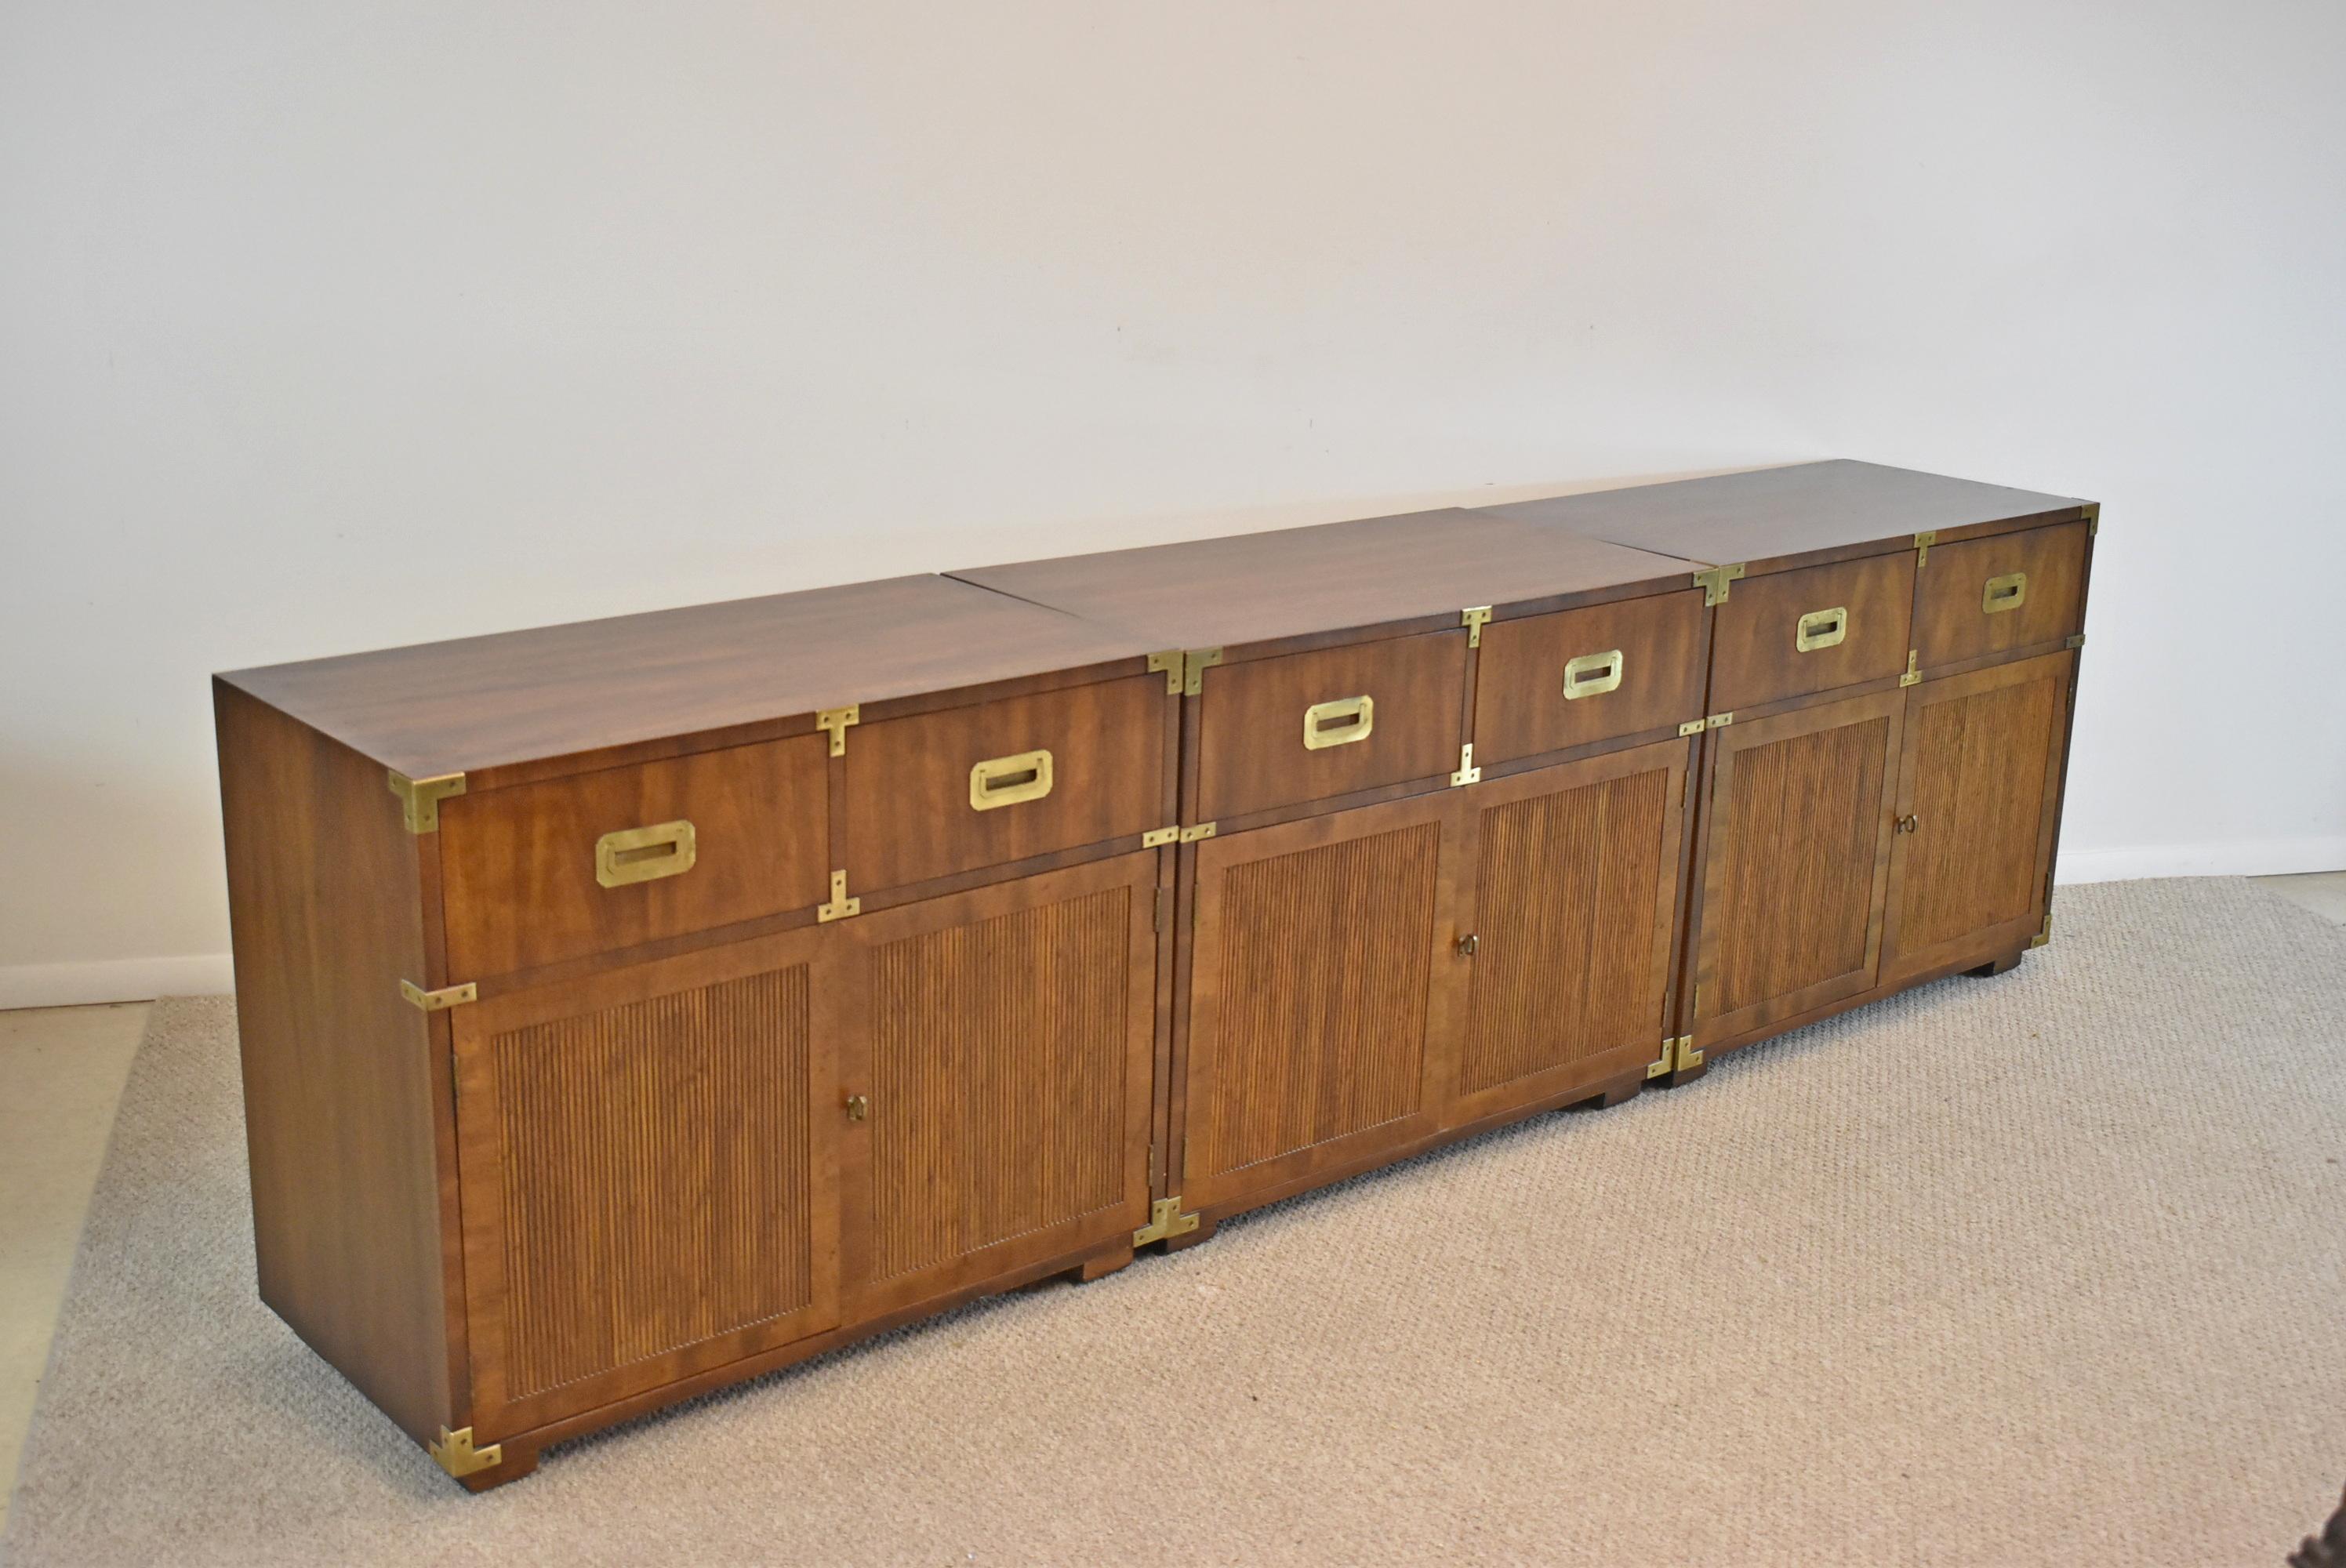 Henredon Campaign Style Walnut chests, 3 available sold separately. Circa 1975. Beautiful Henredon Campaign Chests with a beautiful distressed finish. Two drawers with open storage, with an adjustable shelf below. Handsome solid brass hardware and